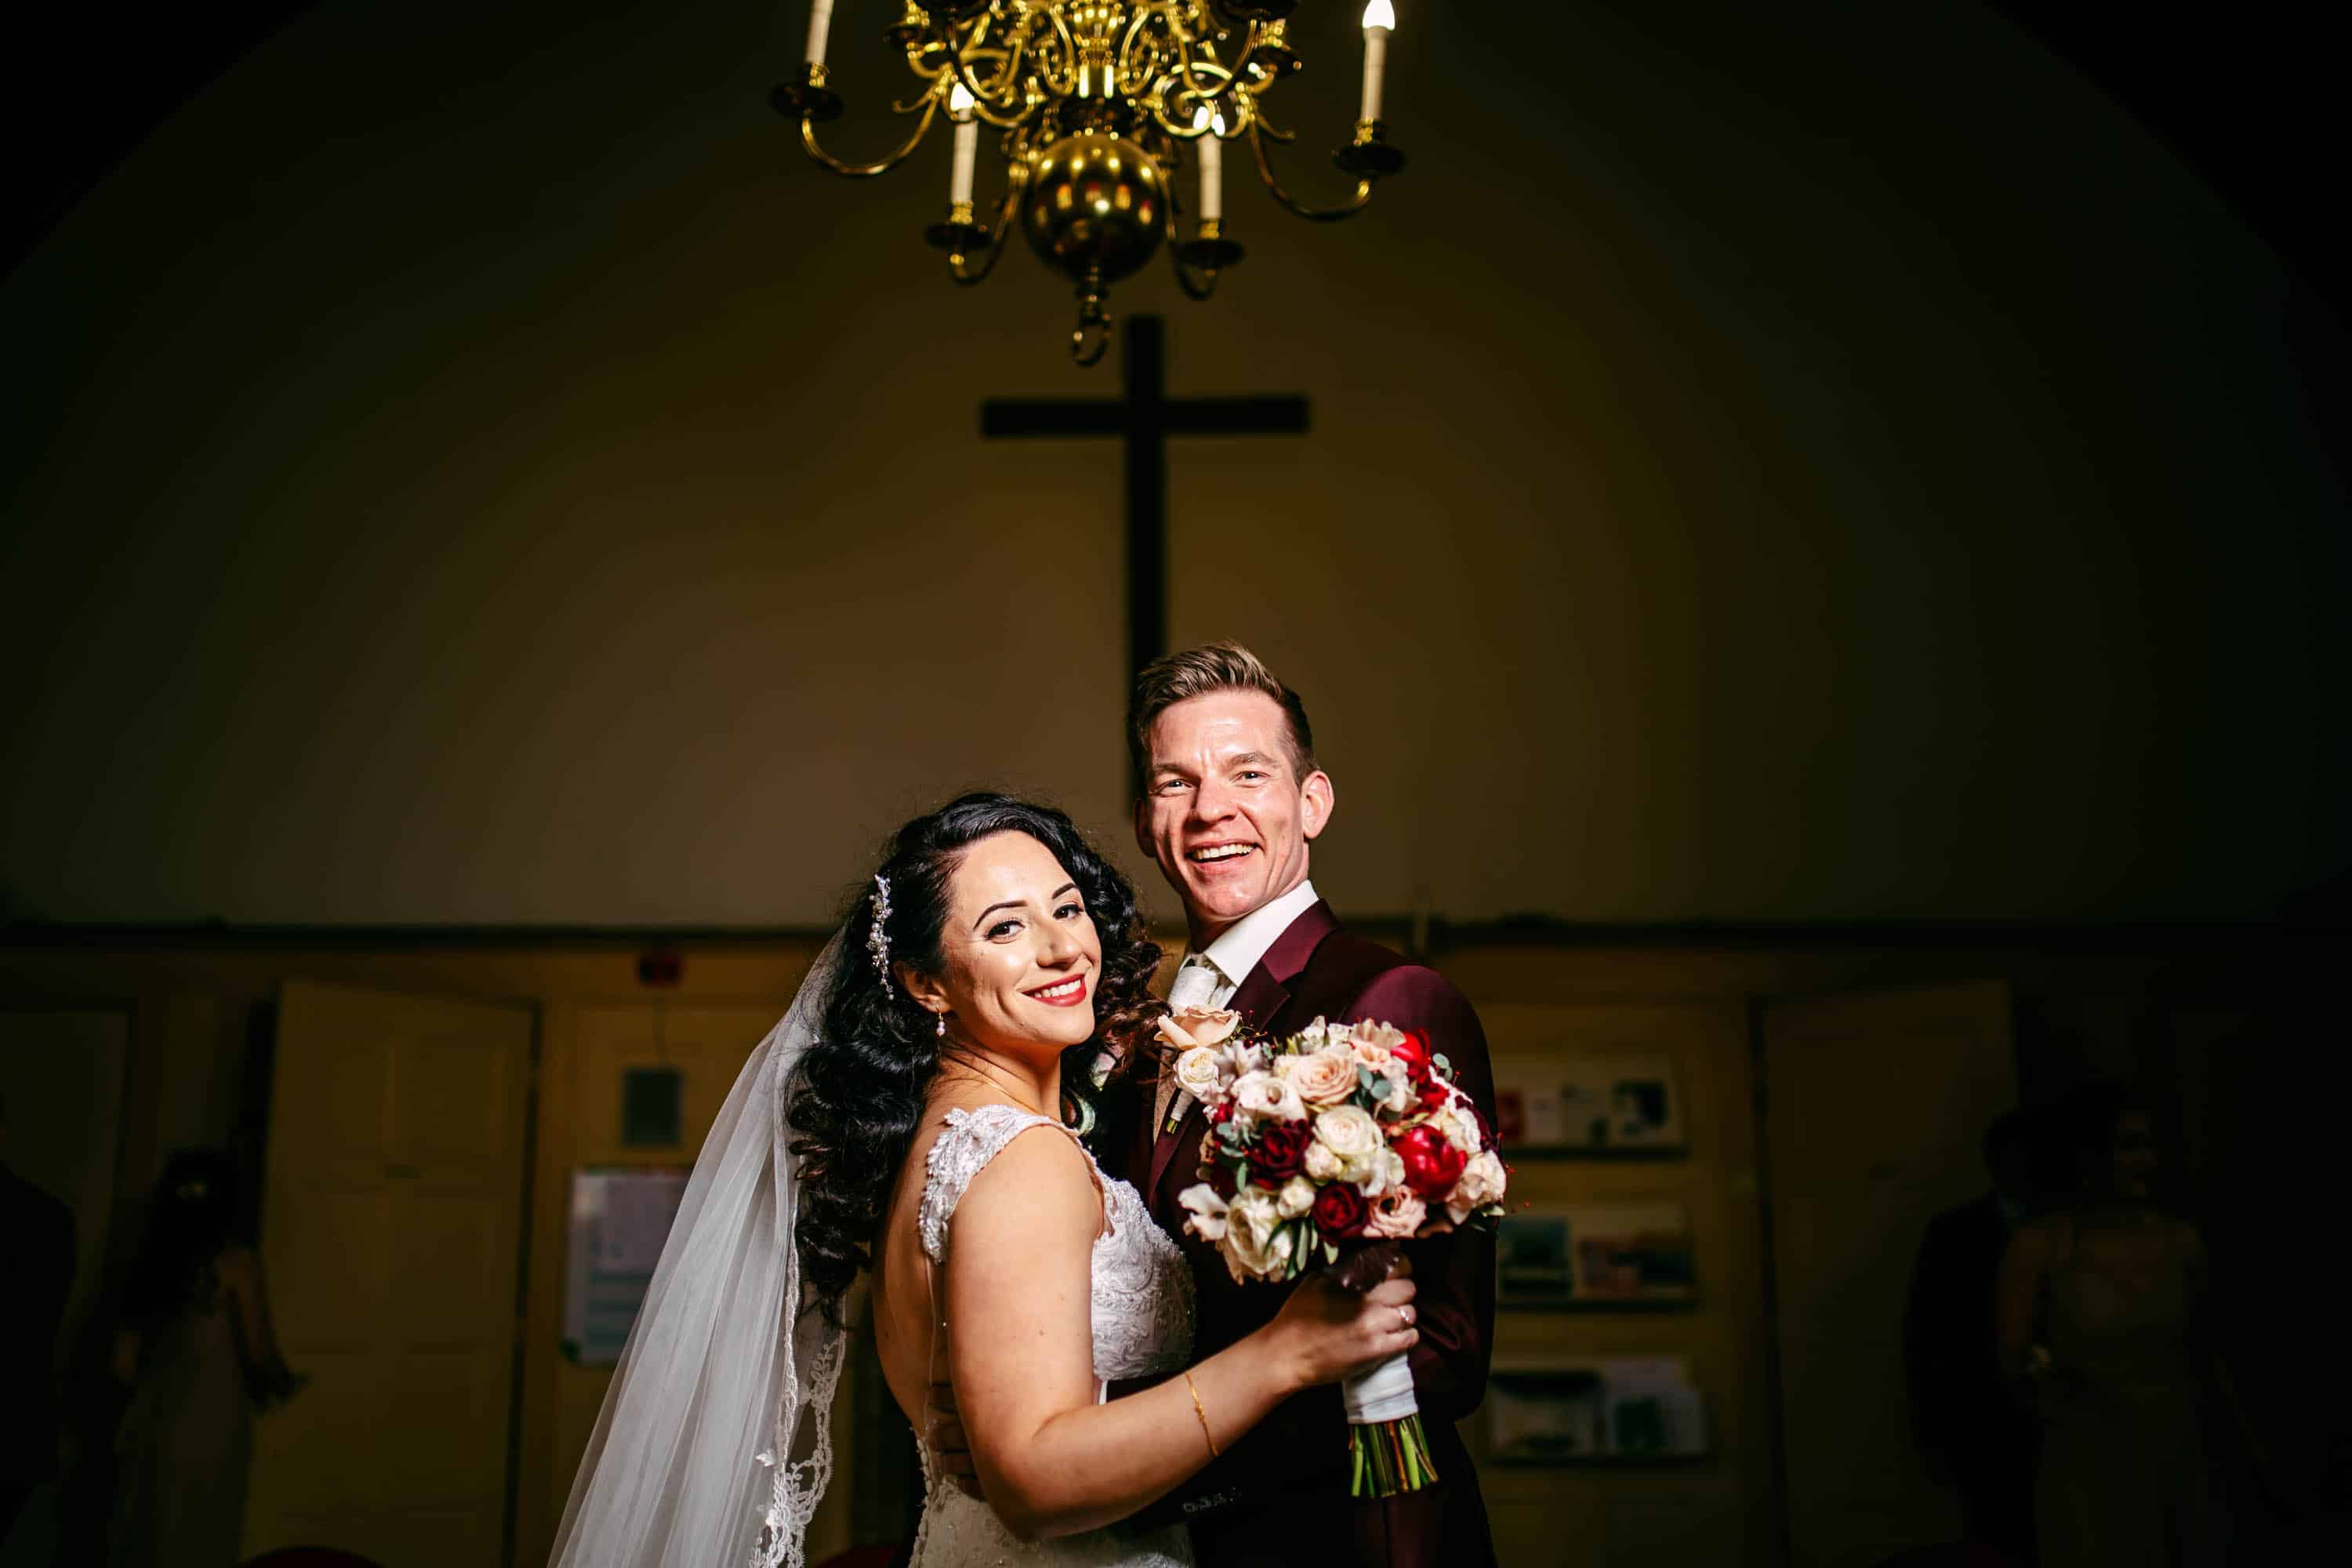 A bride and groom pose for a photo in a church.